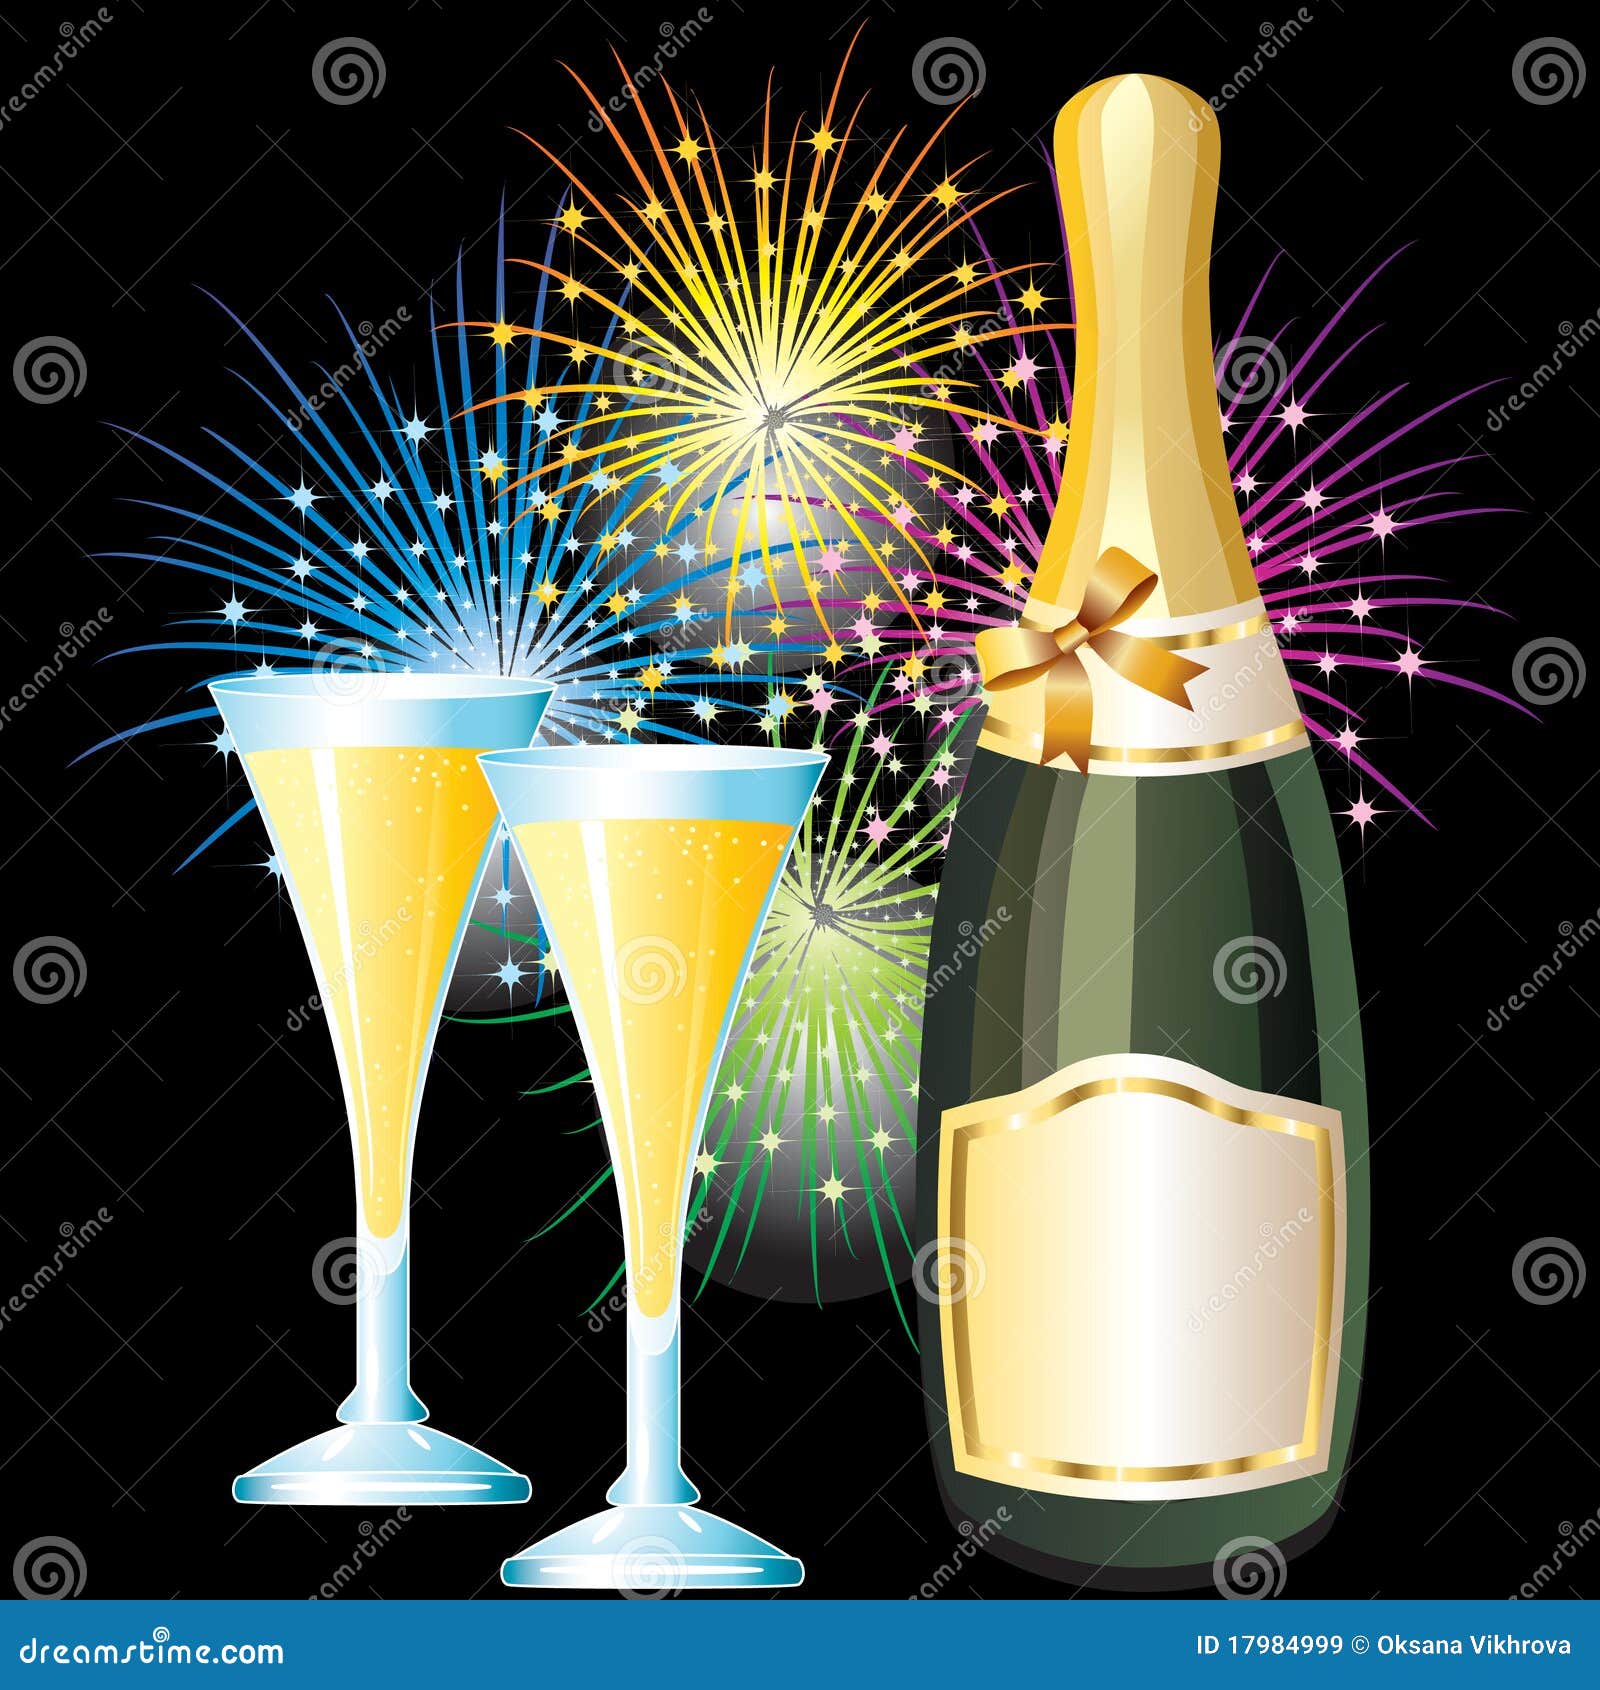 image bouteille champagne pour anniversaire Bottle And Glasses Of Champagne And Fireworks Stock Vector image bouteille champagne pour anniversaire